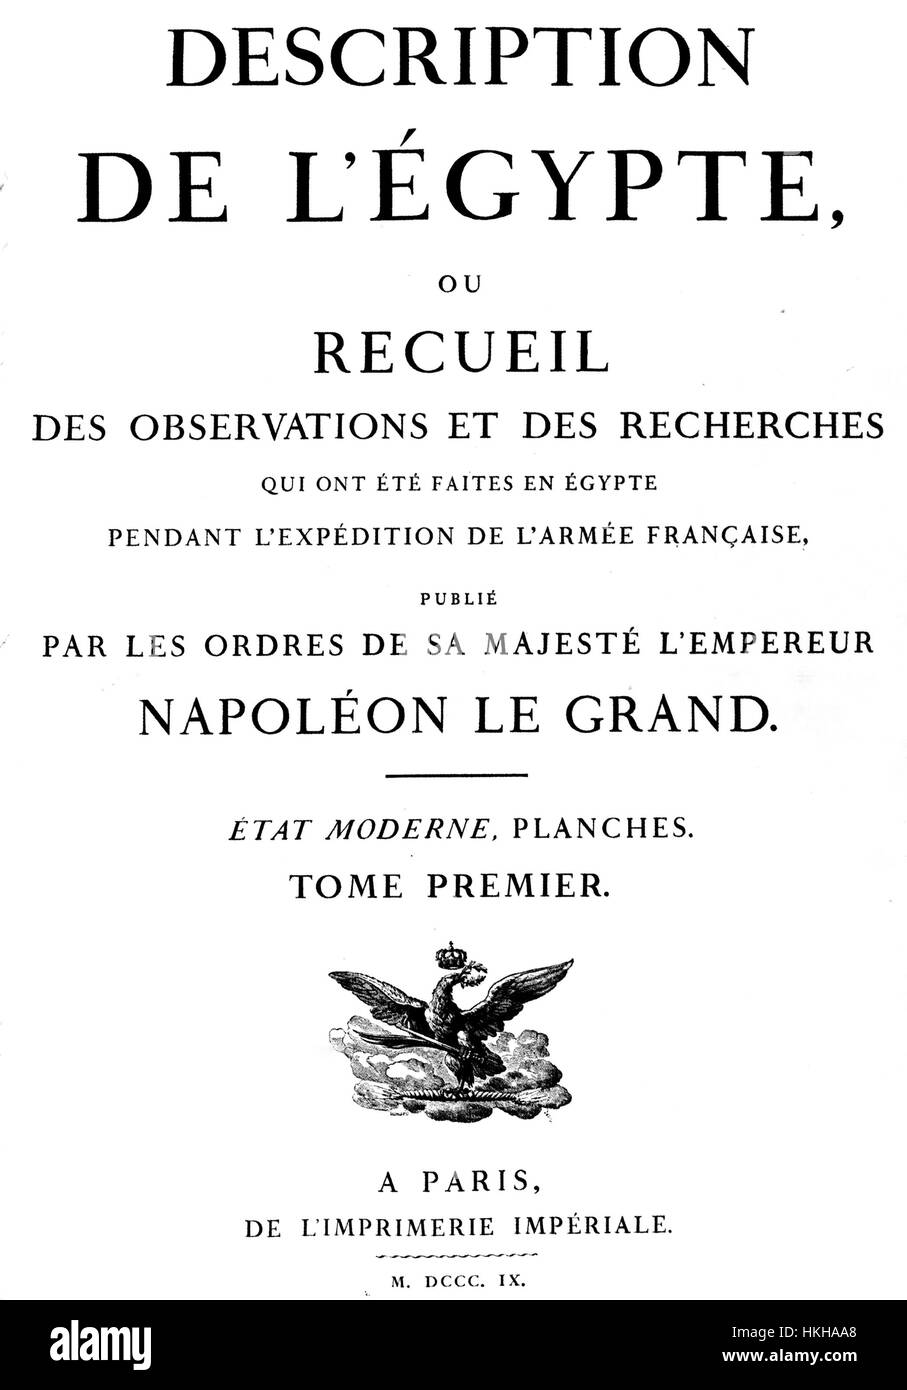 DESCRIPTION OF EGYPT  Cover of the first volume of a series of publications running from 1809 to 1829 describing all aspects of life,history and nature in Egypt following Napoleon's campaign in Egypt and Syria from 1798 to 1801 Stock Photo